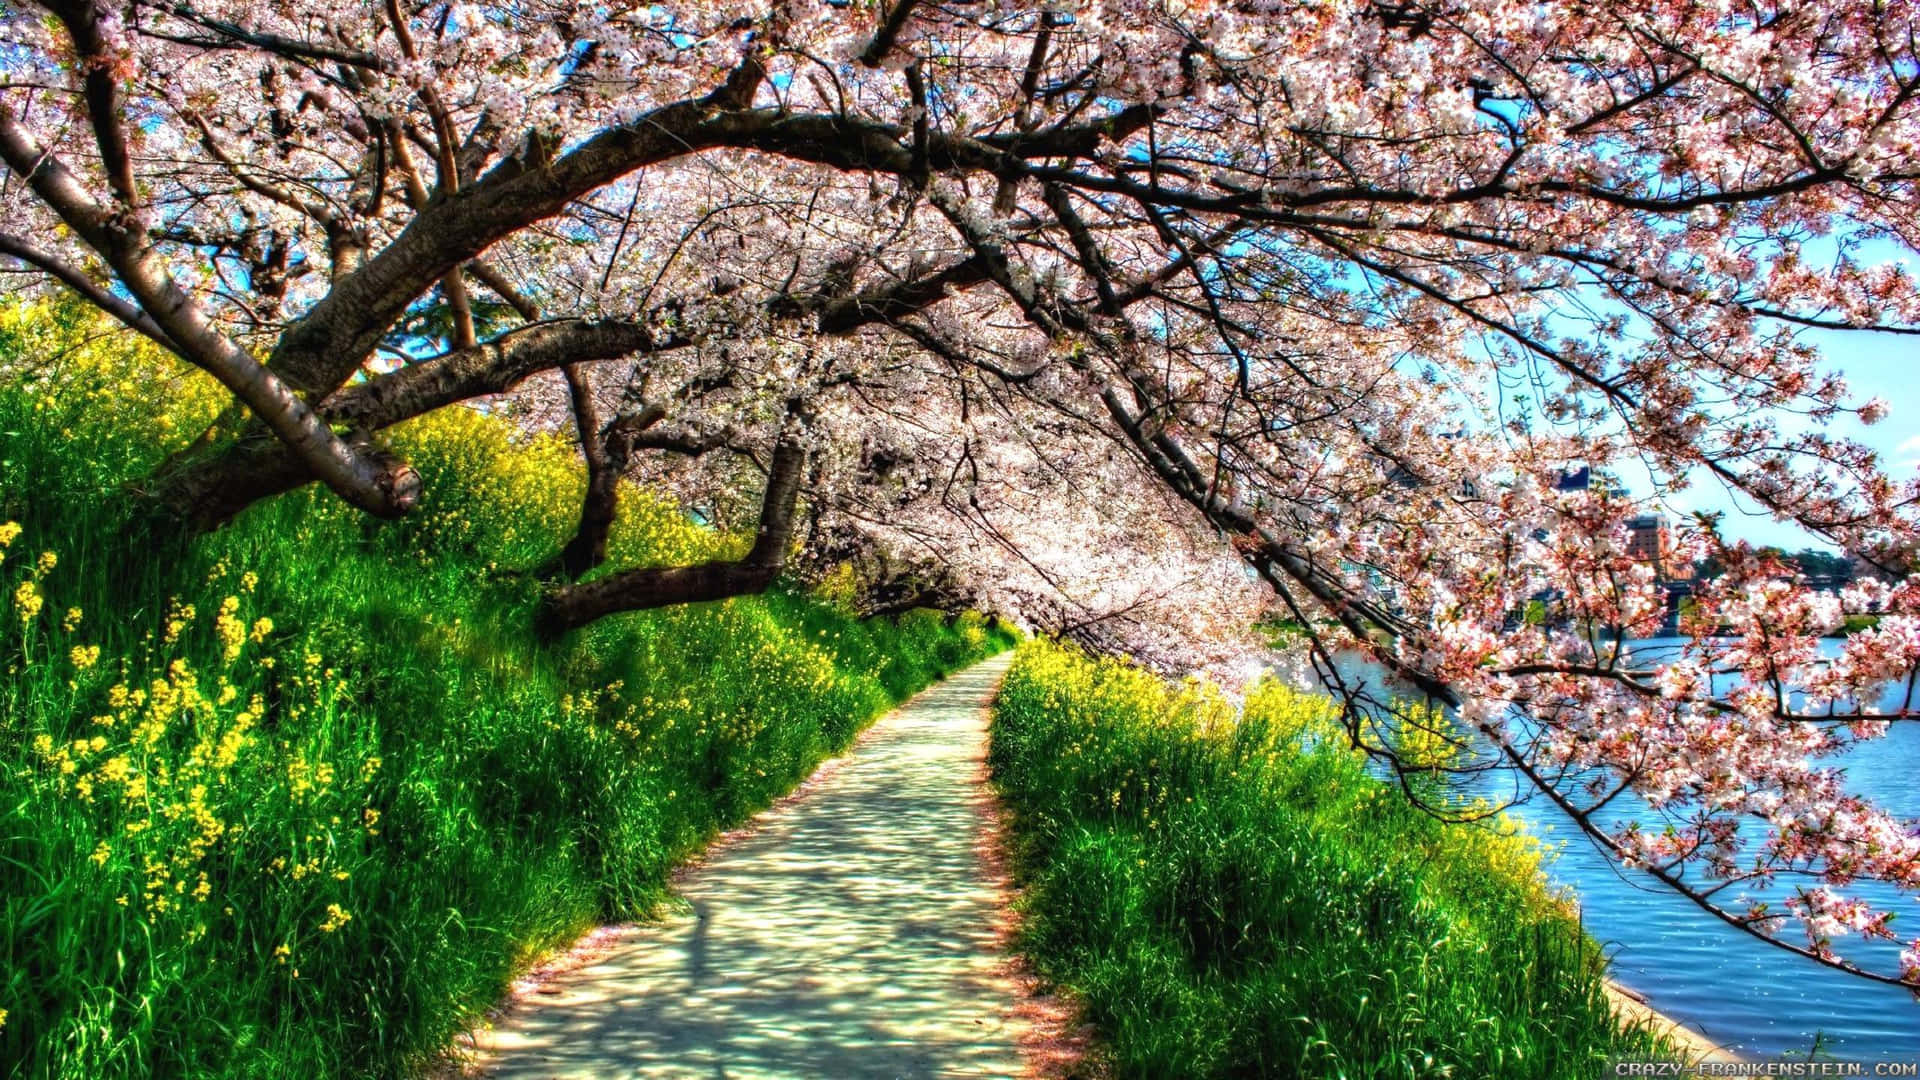 Take a Stroll in the Spring Time